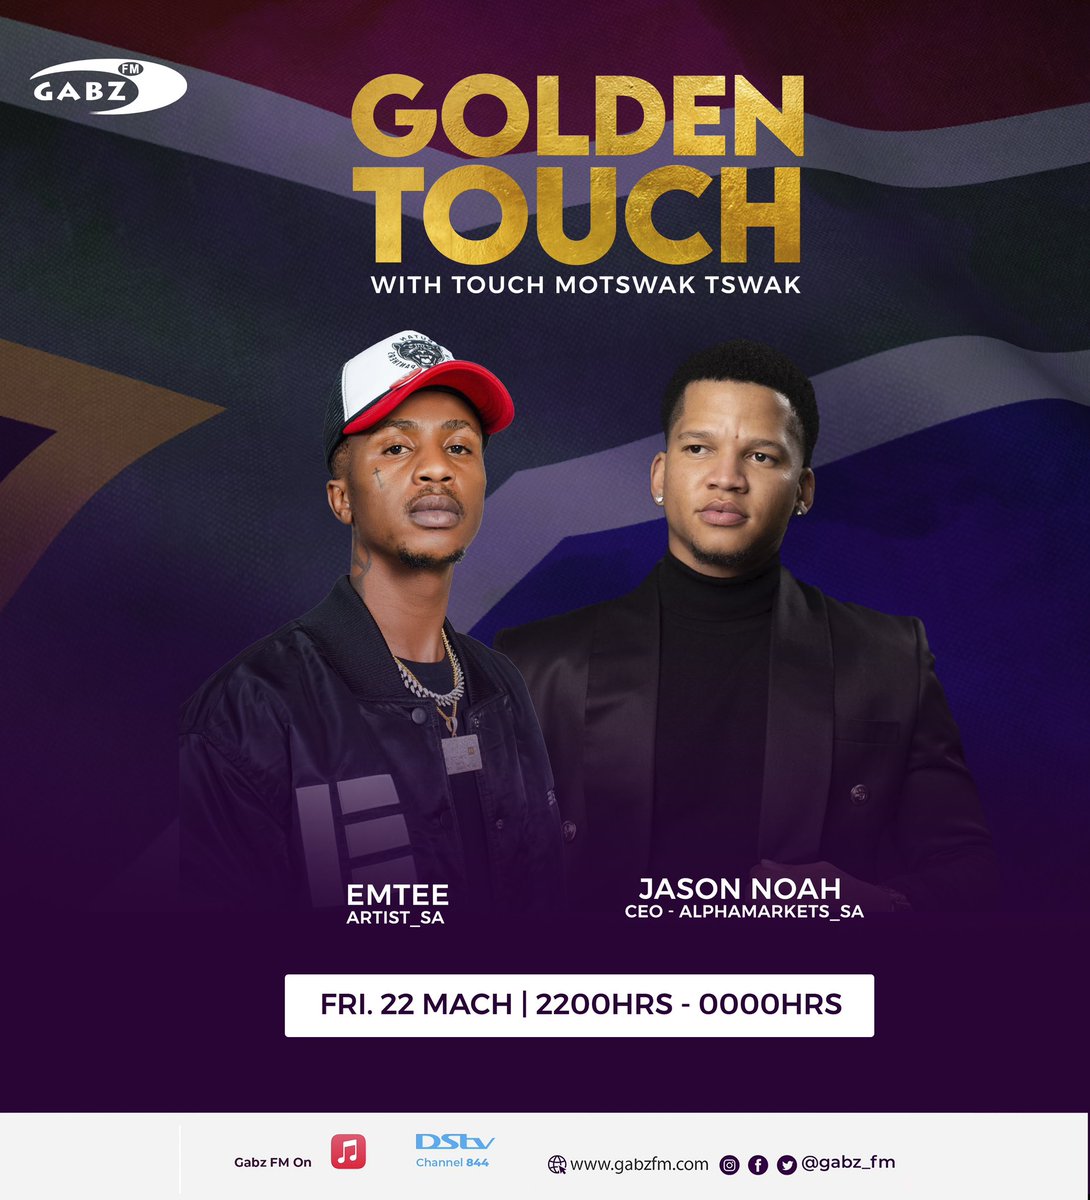 Tonight we're excited to have a special broadcast with Emtee and JasonNoah from South Africa! Tune in to Golden Touch from 10:00 PM to hear their latest tracks and stories from their music careers. We can't wait to hear what they have to say! #PowerToEngageYourWorld